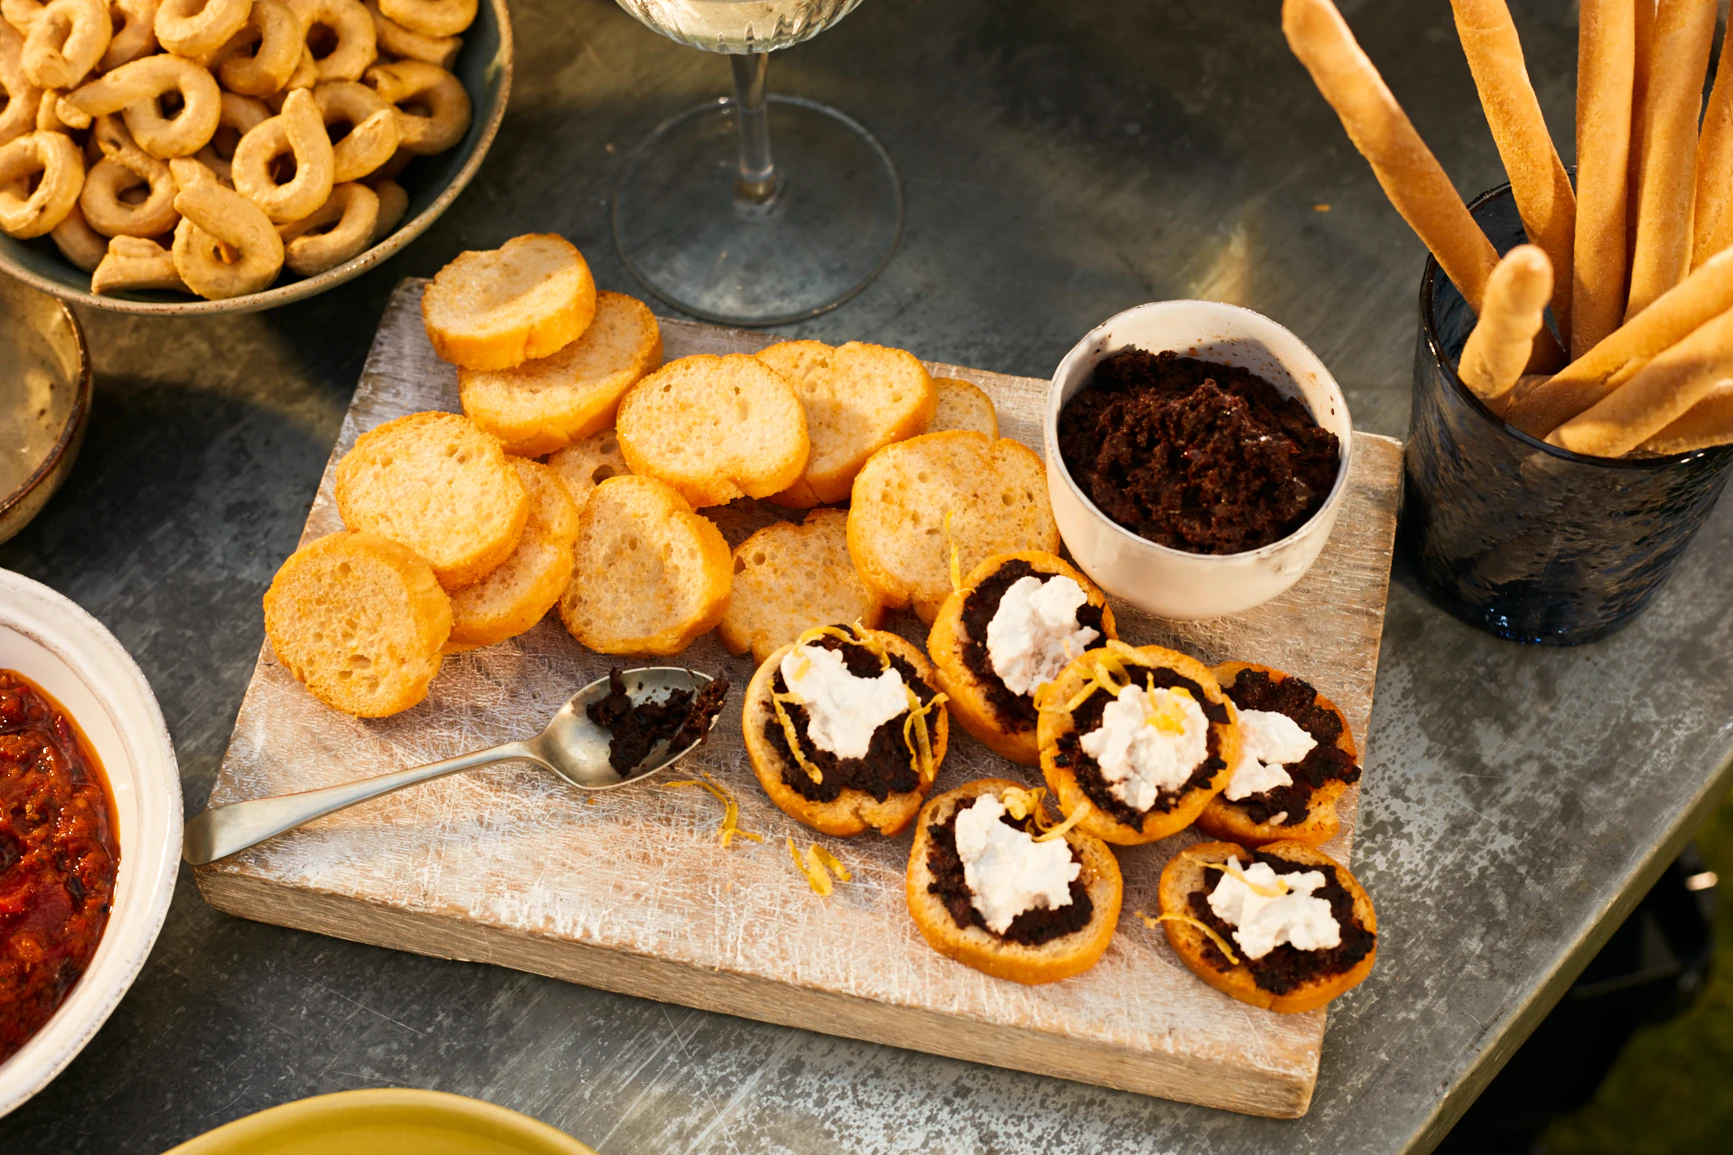 Chilli crostini are on a board, some are topped with a brown dip and white cheese, some aren't topped.